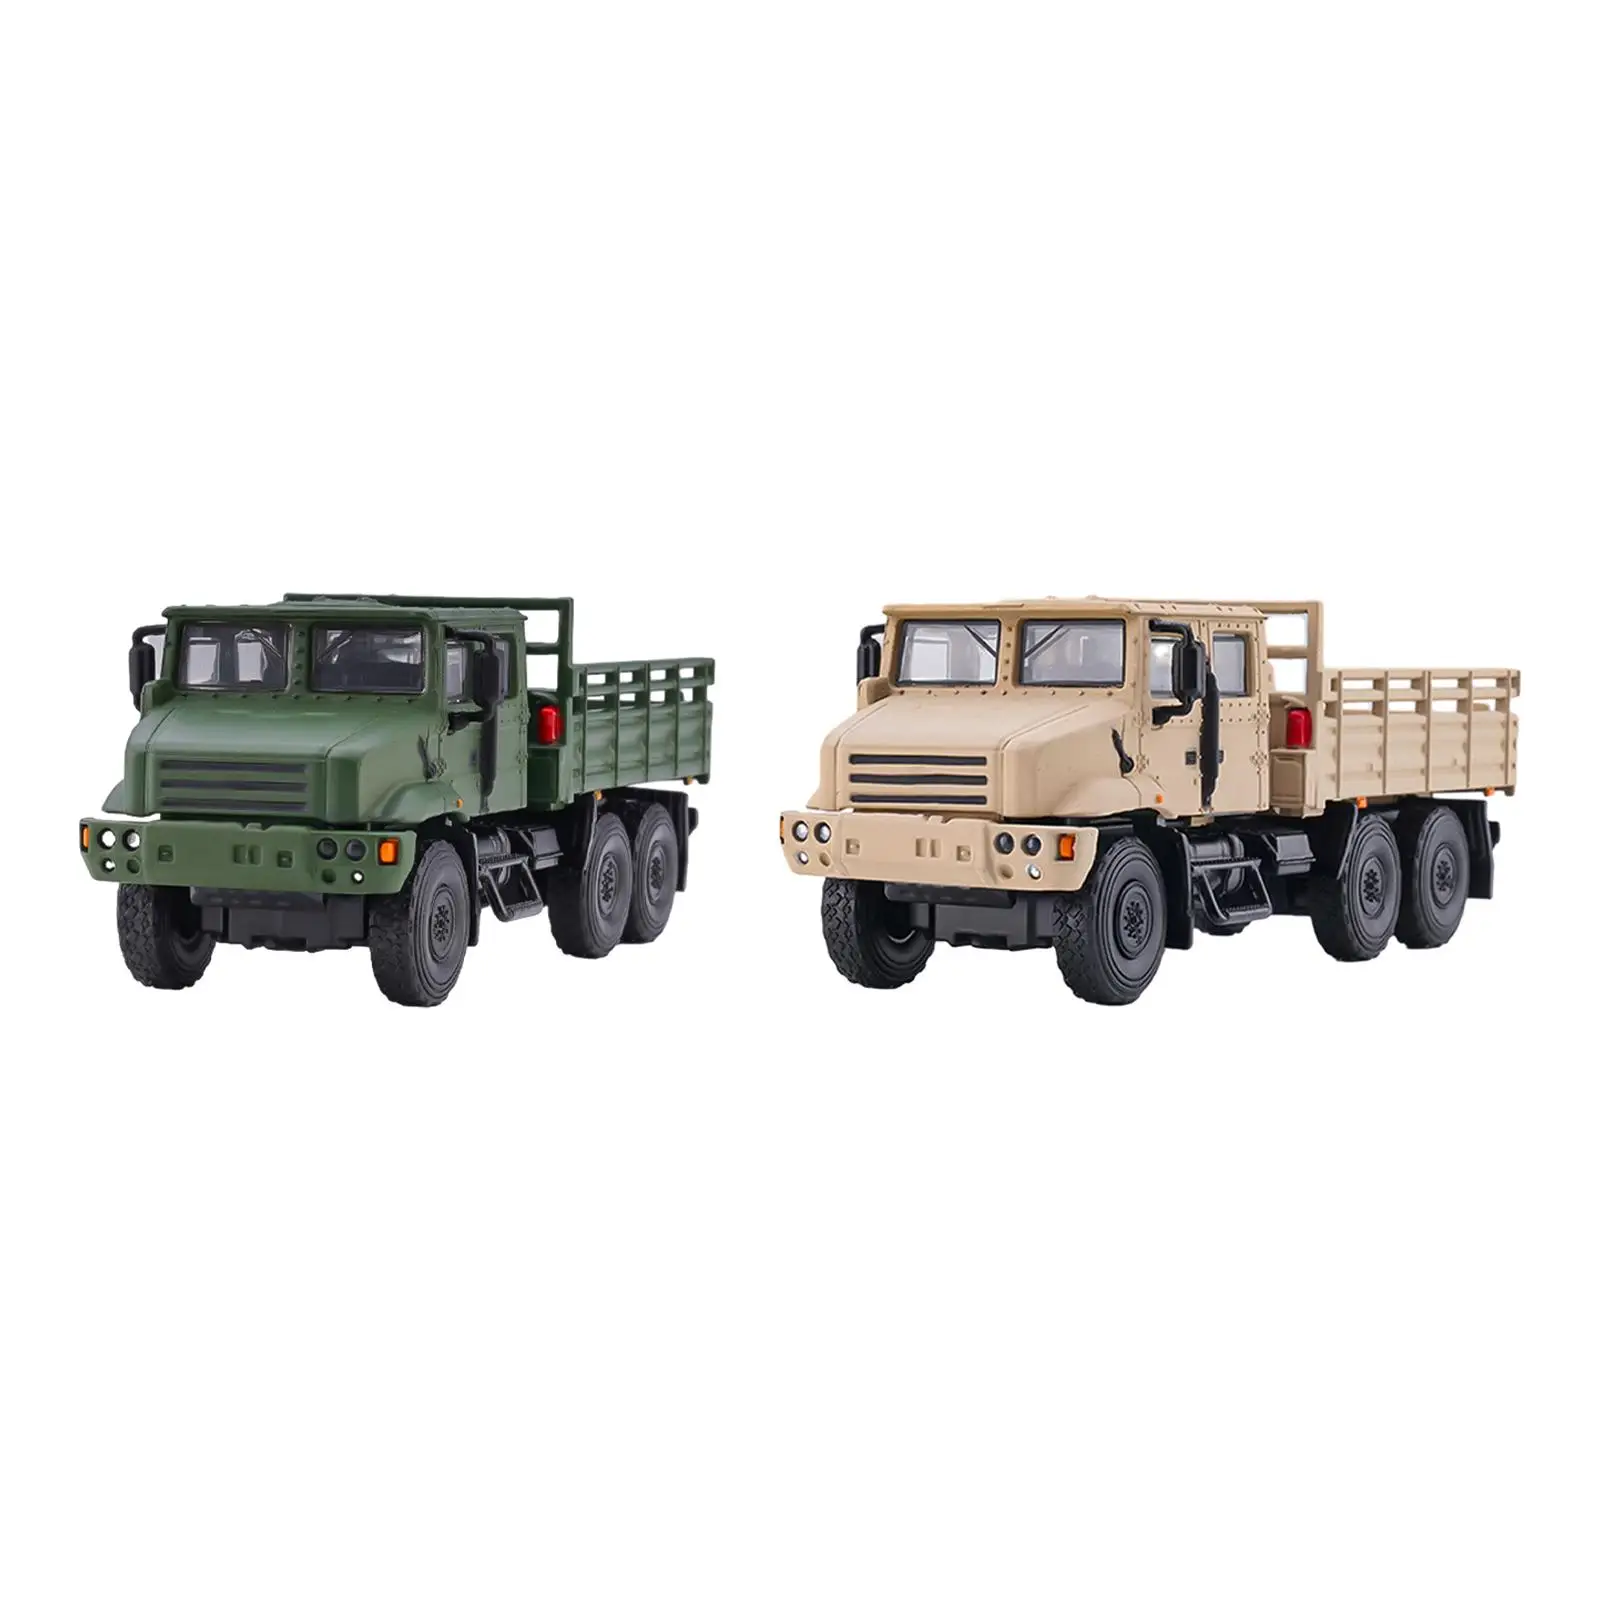 Diecast Car Alloy Sand Table Ornament Collectible 1/64 Car Model Mini Vehicles Toys for Birthday Gift Kids Boy Girl Adults Decor